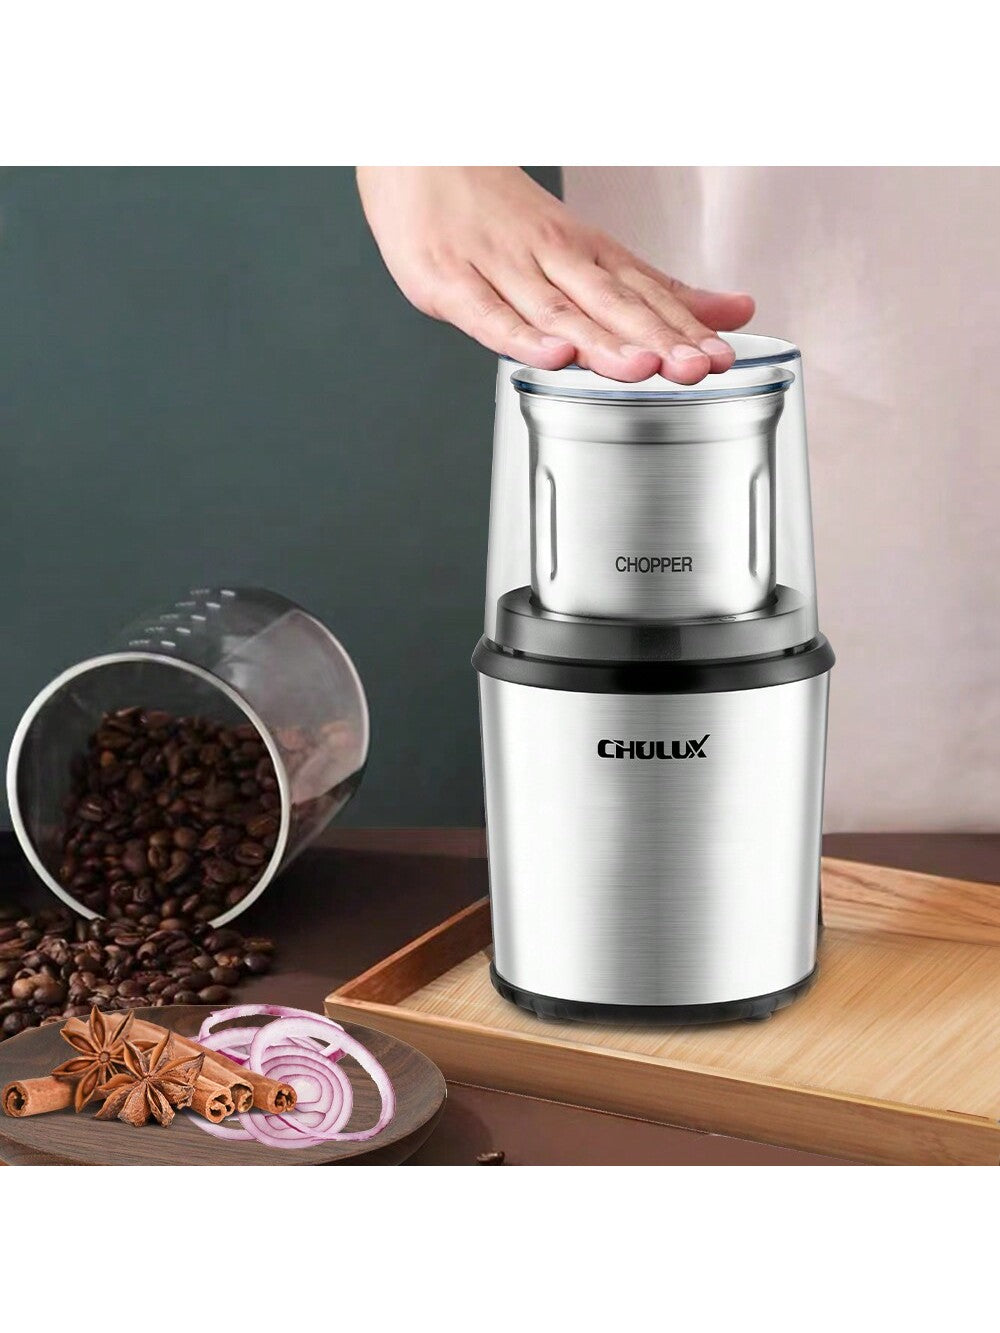 1 2.65 Oz Plug-type Electric Coffee Grinder, Silver, Fast Grinding, Wet And Dry Cup Use, Suitable For Coffee, Spices, Herbs, Nuts, Cereals-Silver-1